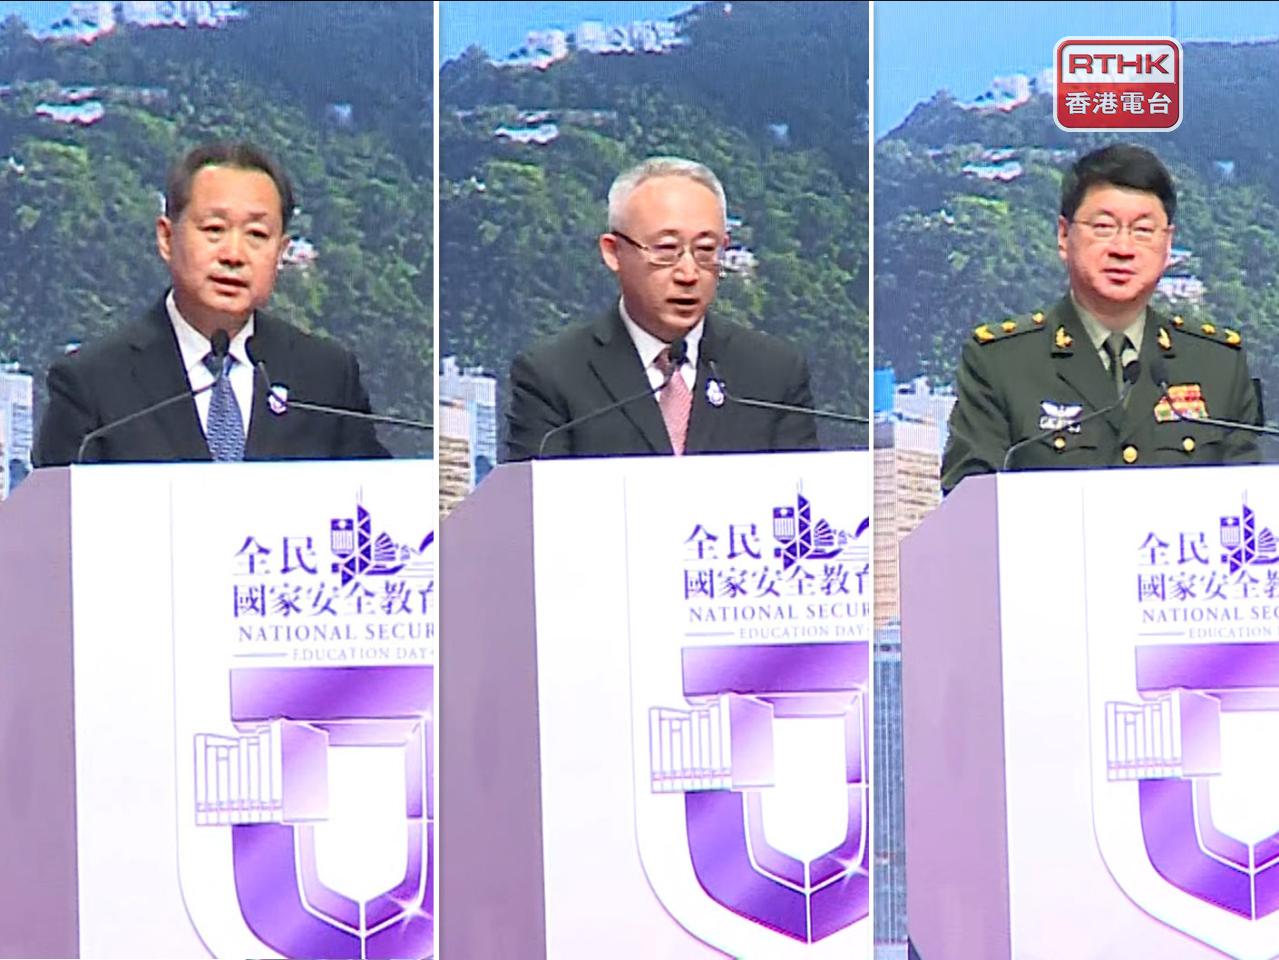 'Maintaining national security is top priority for HK'